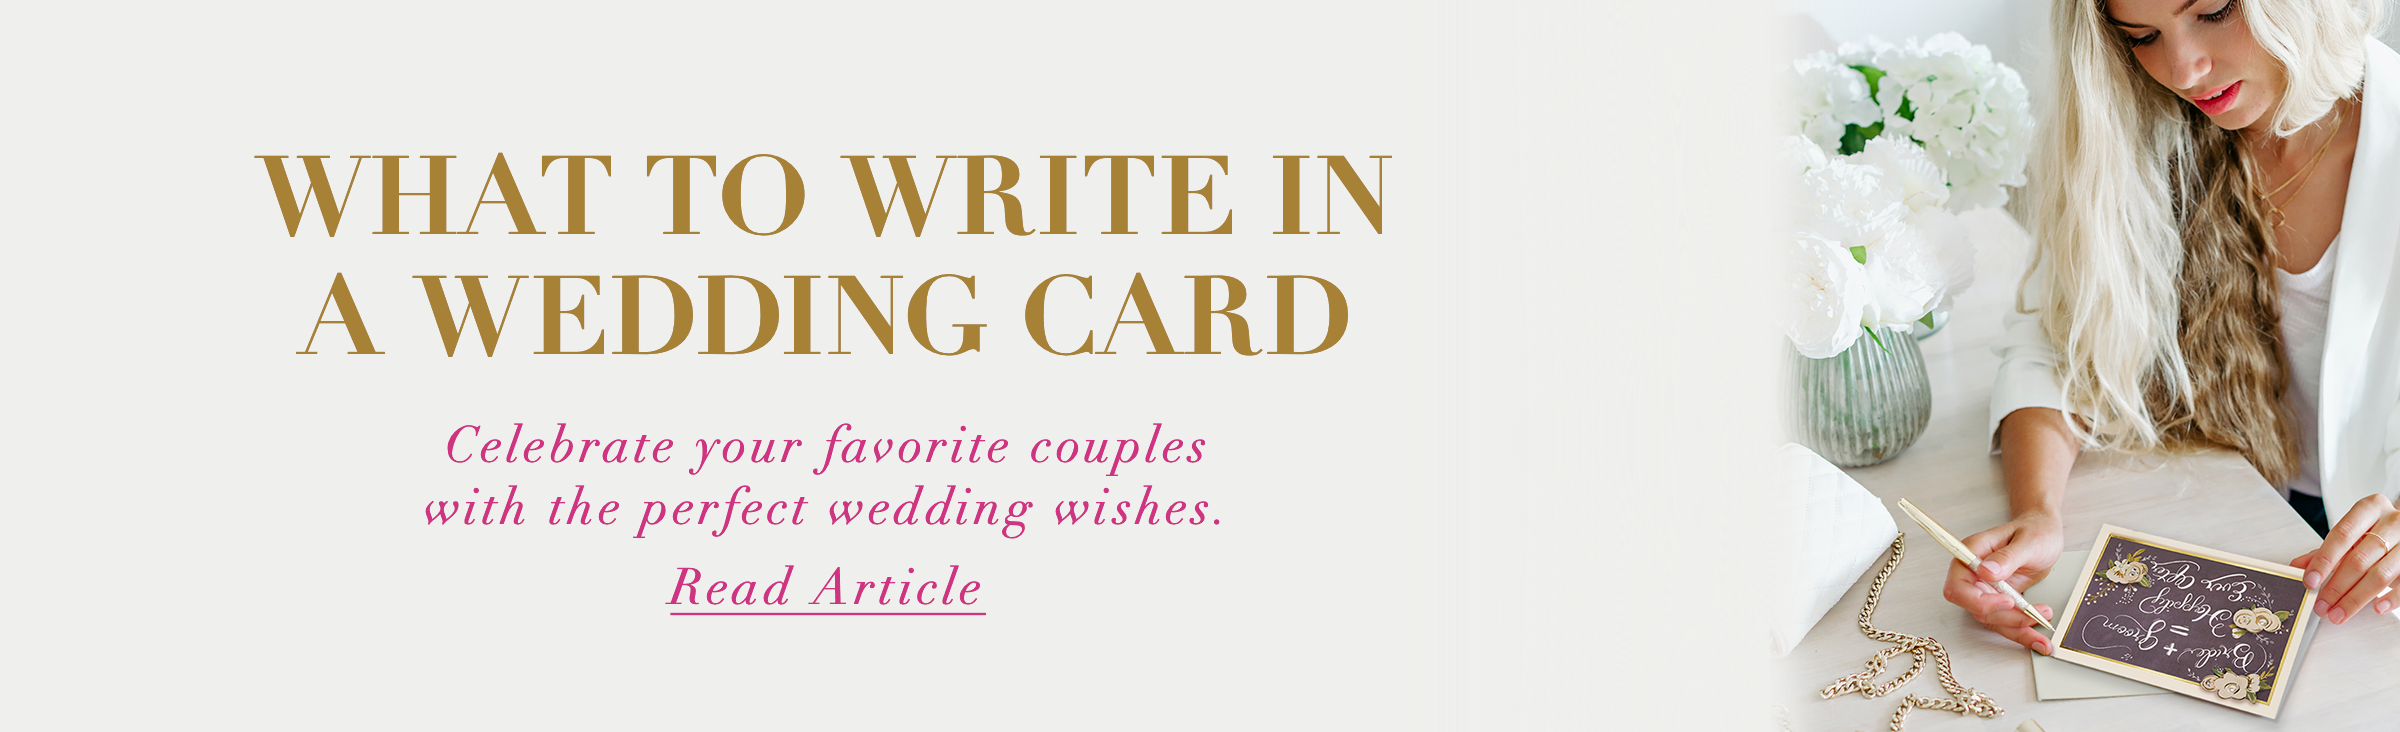 What to Write in a Wedding Card Celebrate your favorite couples with the perfect wedding wishes read article